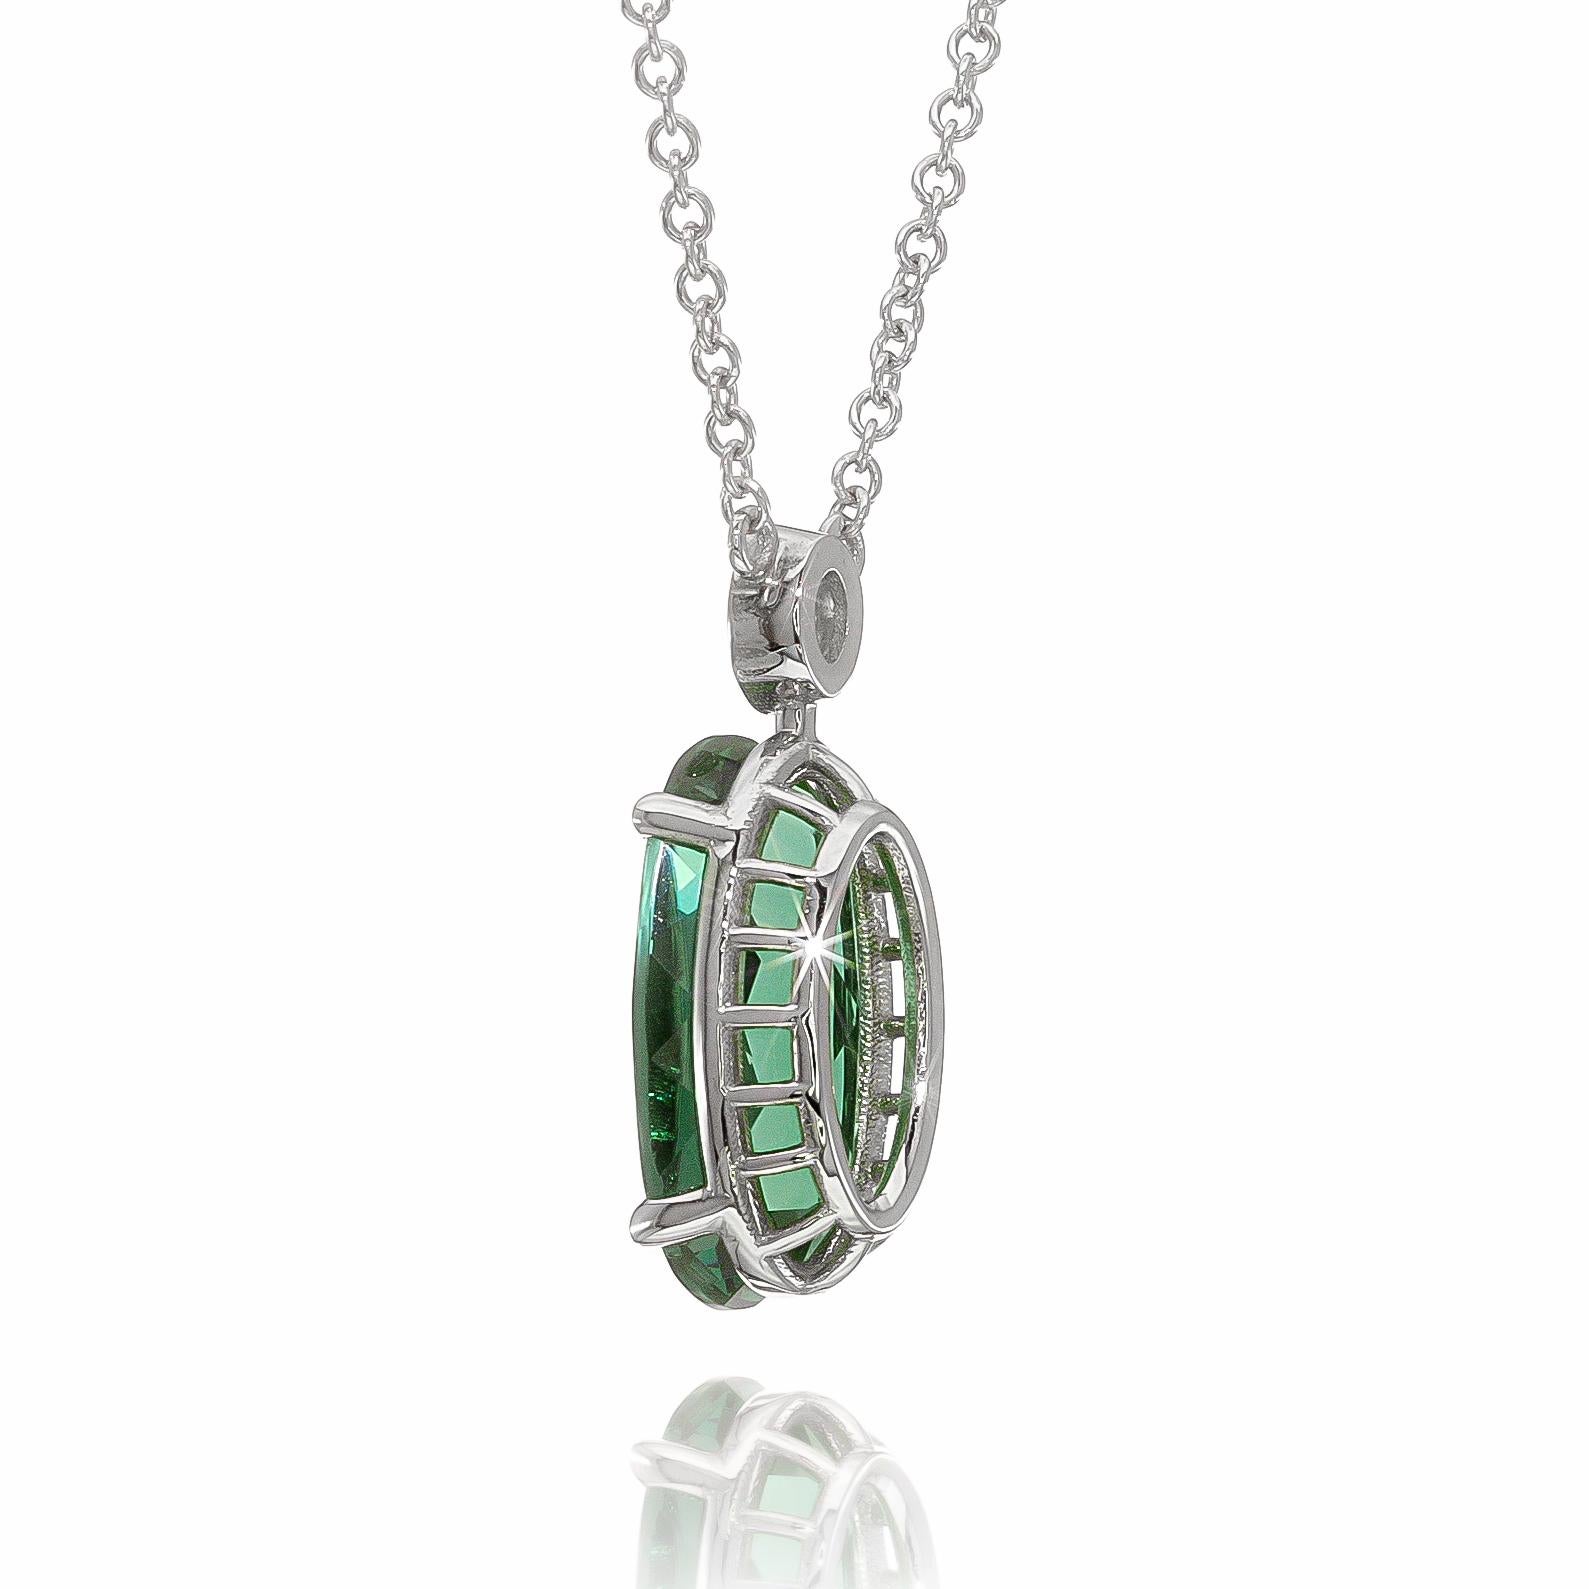 Dive into the captivating allure of this 3.24 carats oval-shaped blue-green Tourmaline pendant set in 14K White Gold. Its mesmerizing color complements a range of skin tones, and the unique mixed cut disperses light beautifully, showcasing its